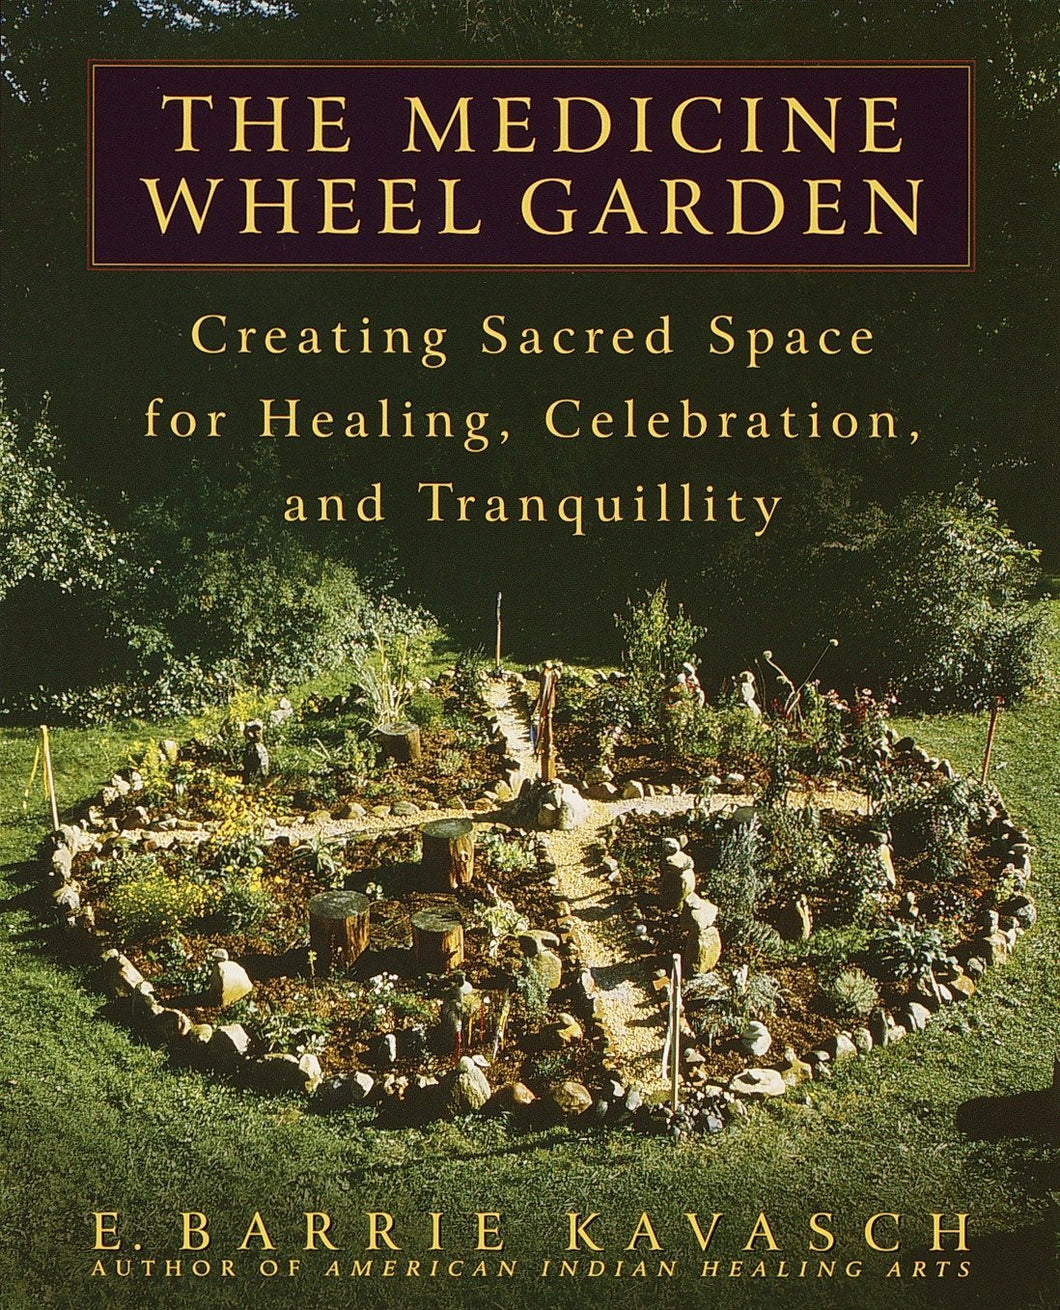 The Medicine Wheel Garden: Creating Sacred Space for Healing, Celebration, and Tranquillity [E. Barrie Kavasch]